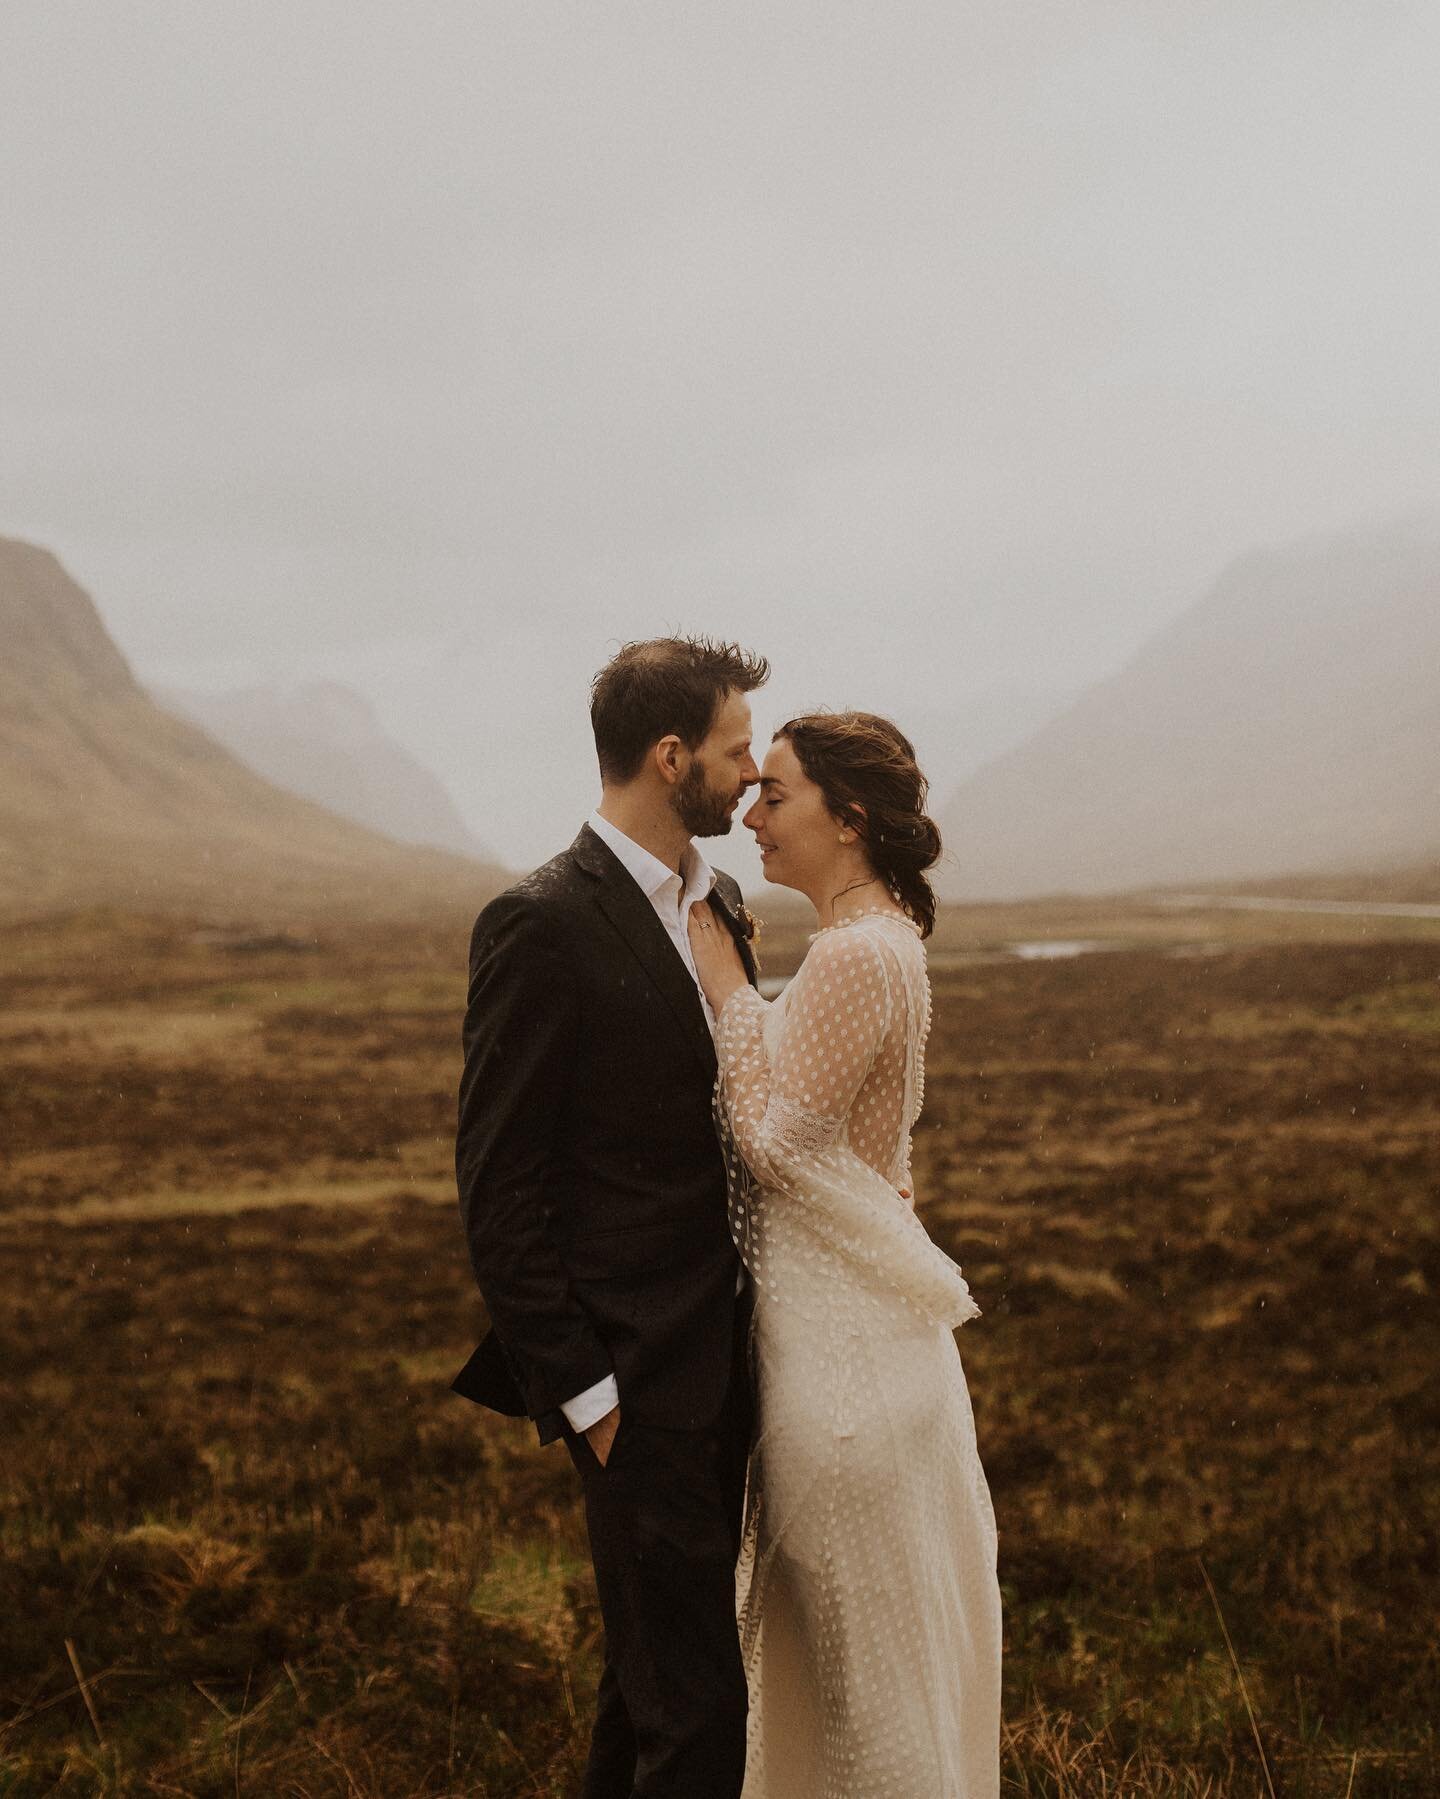 The fact that I can only share 10 slides of this right now is so hard because I am obsessed with these previews!! What a day this was. These two eloped in scotland with their baby and it was truly magical, despite Scotland throwing all the elements a